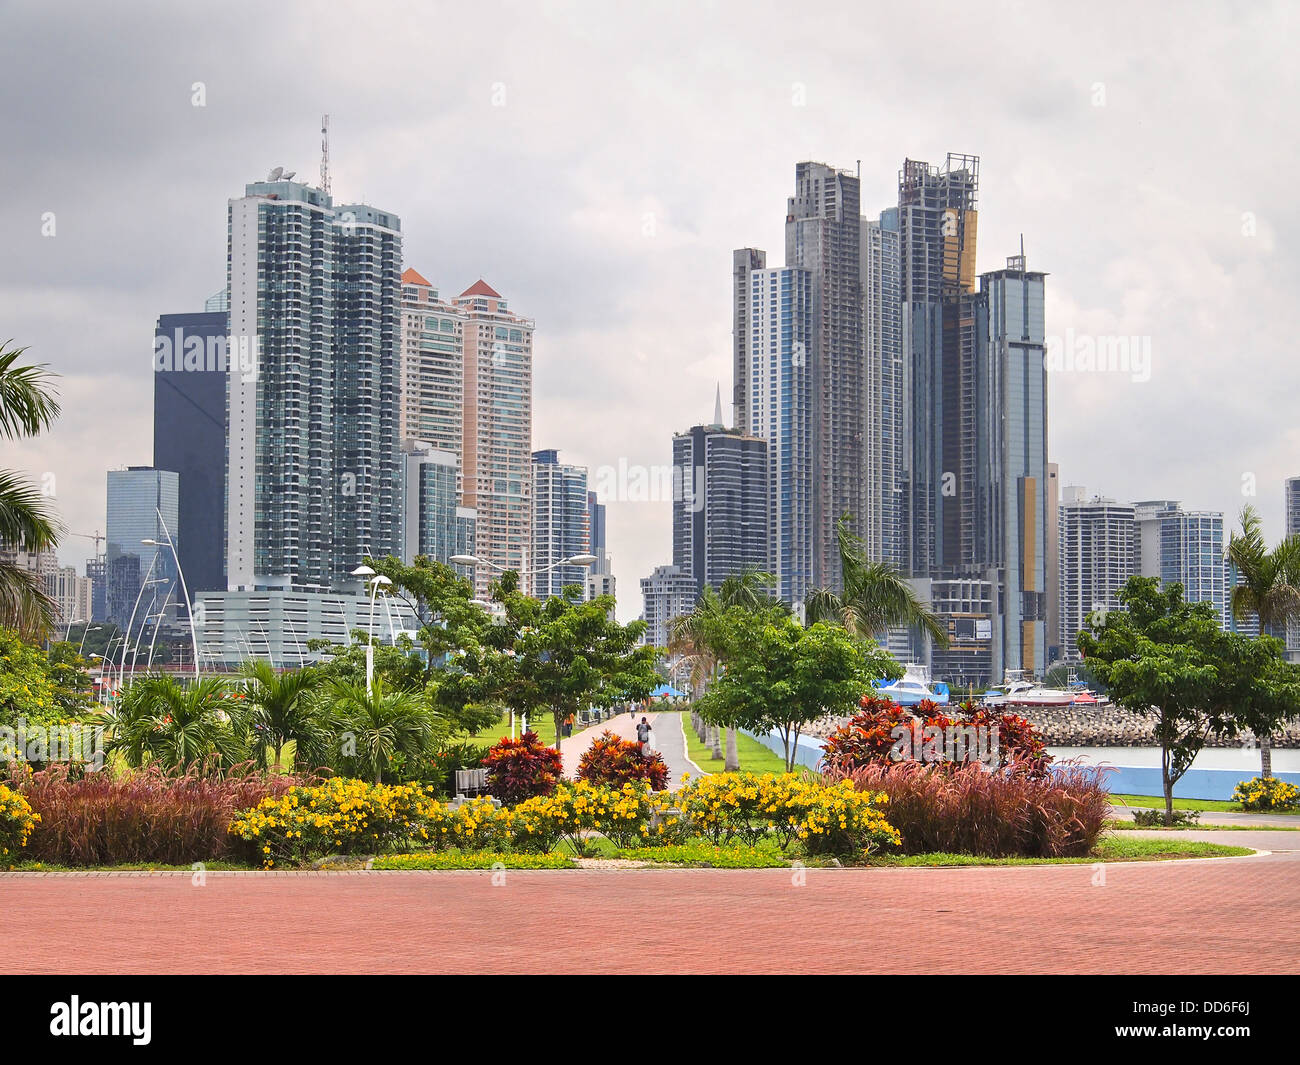 Skyscrapers and flowers in Panama City, Panama, Central America Stock Photo